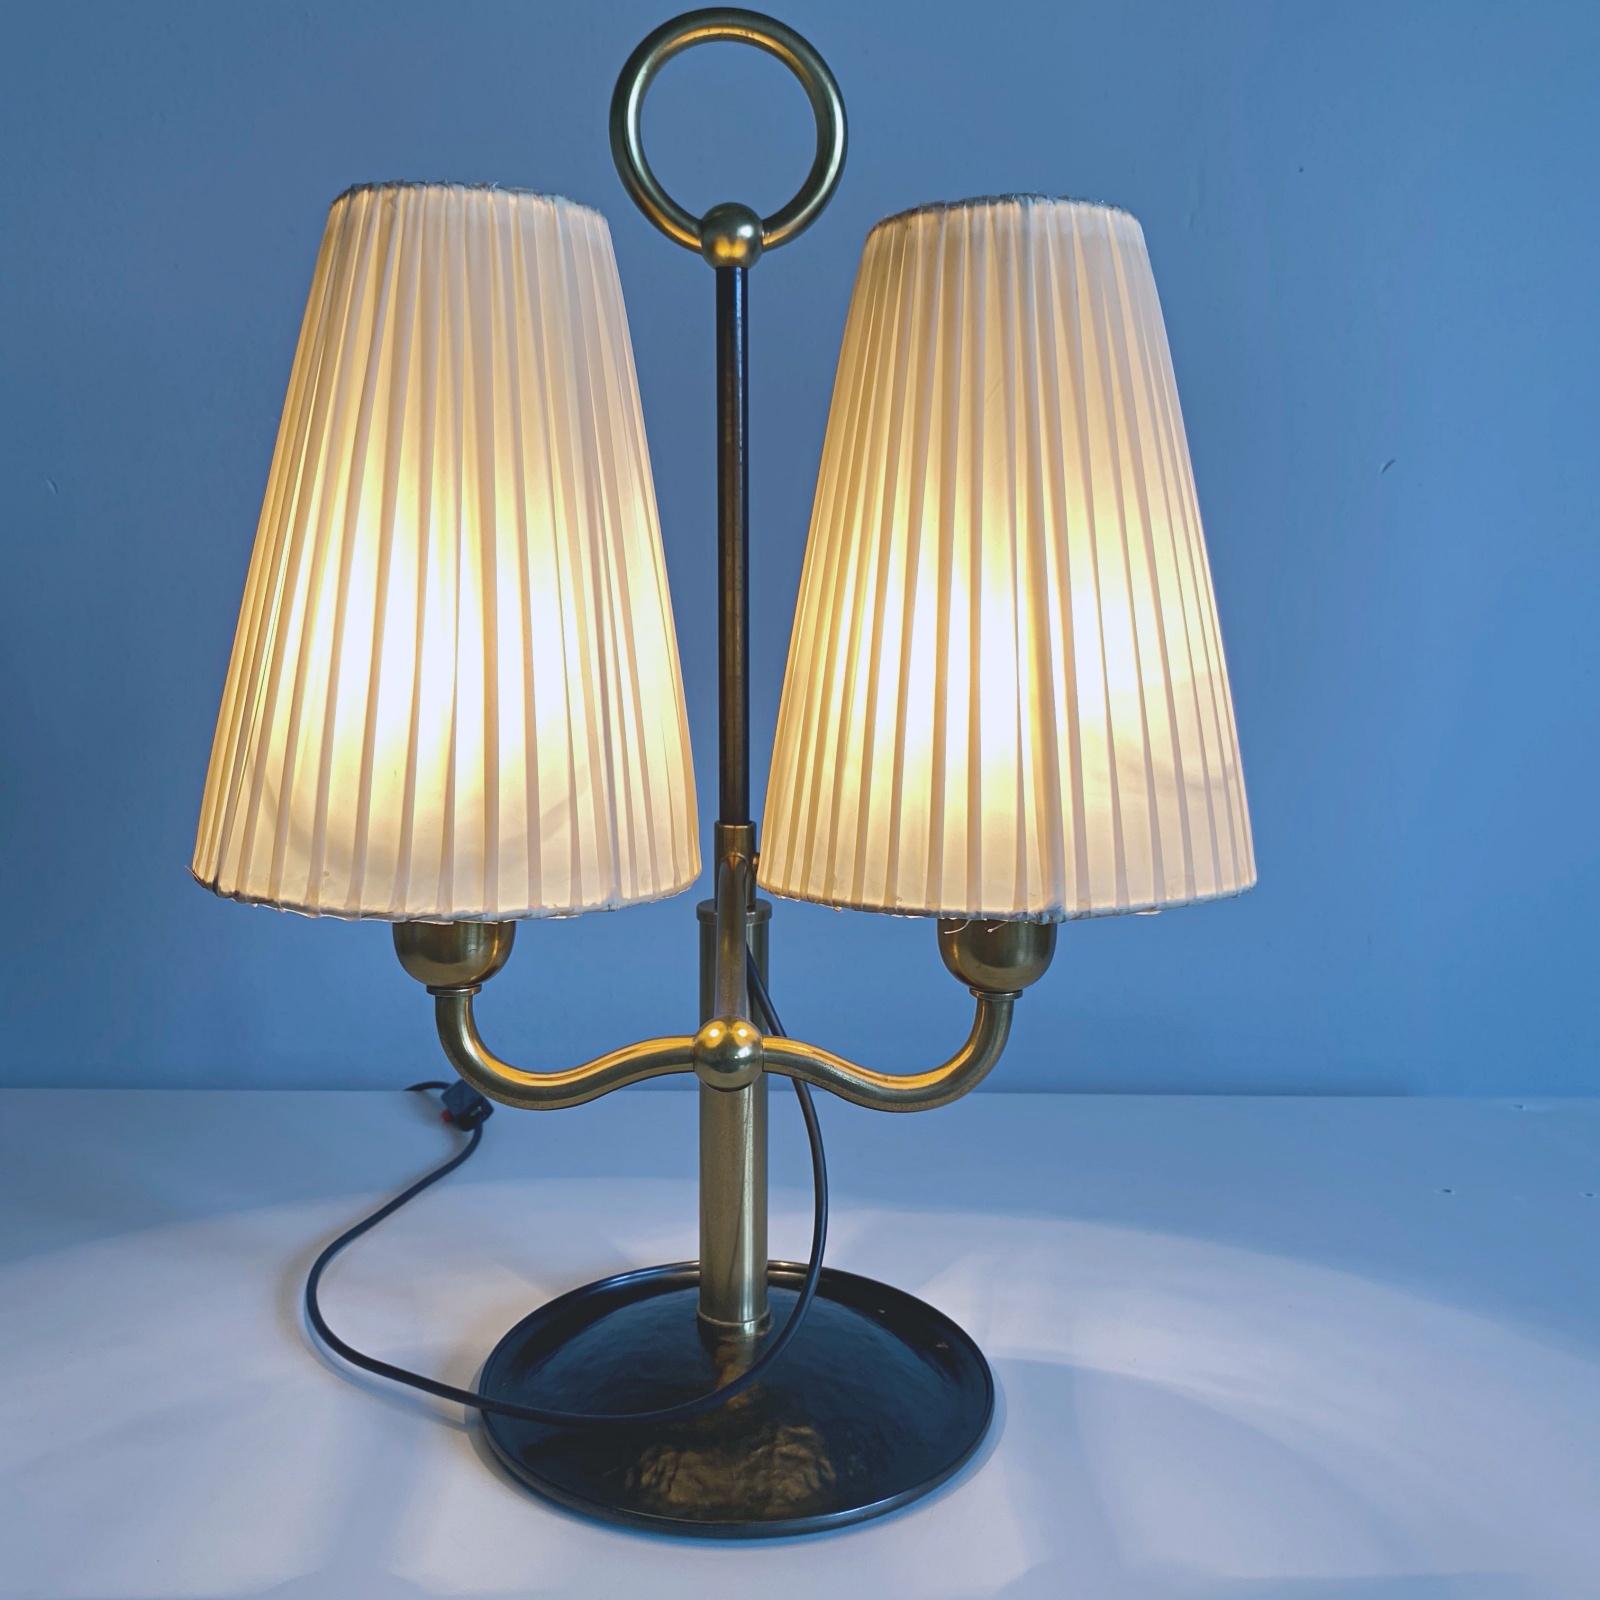 Early 20th Century Josef Frank Two Light Brass Table Lamp, Viennese Modern Age, Austria For Sale